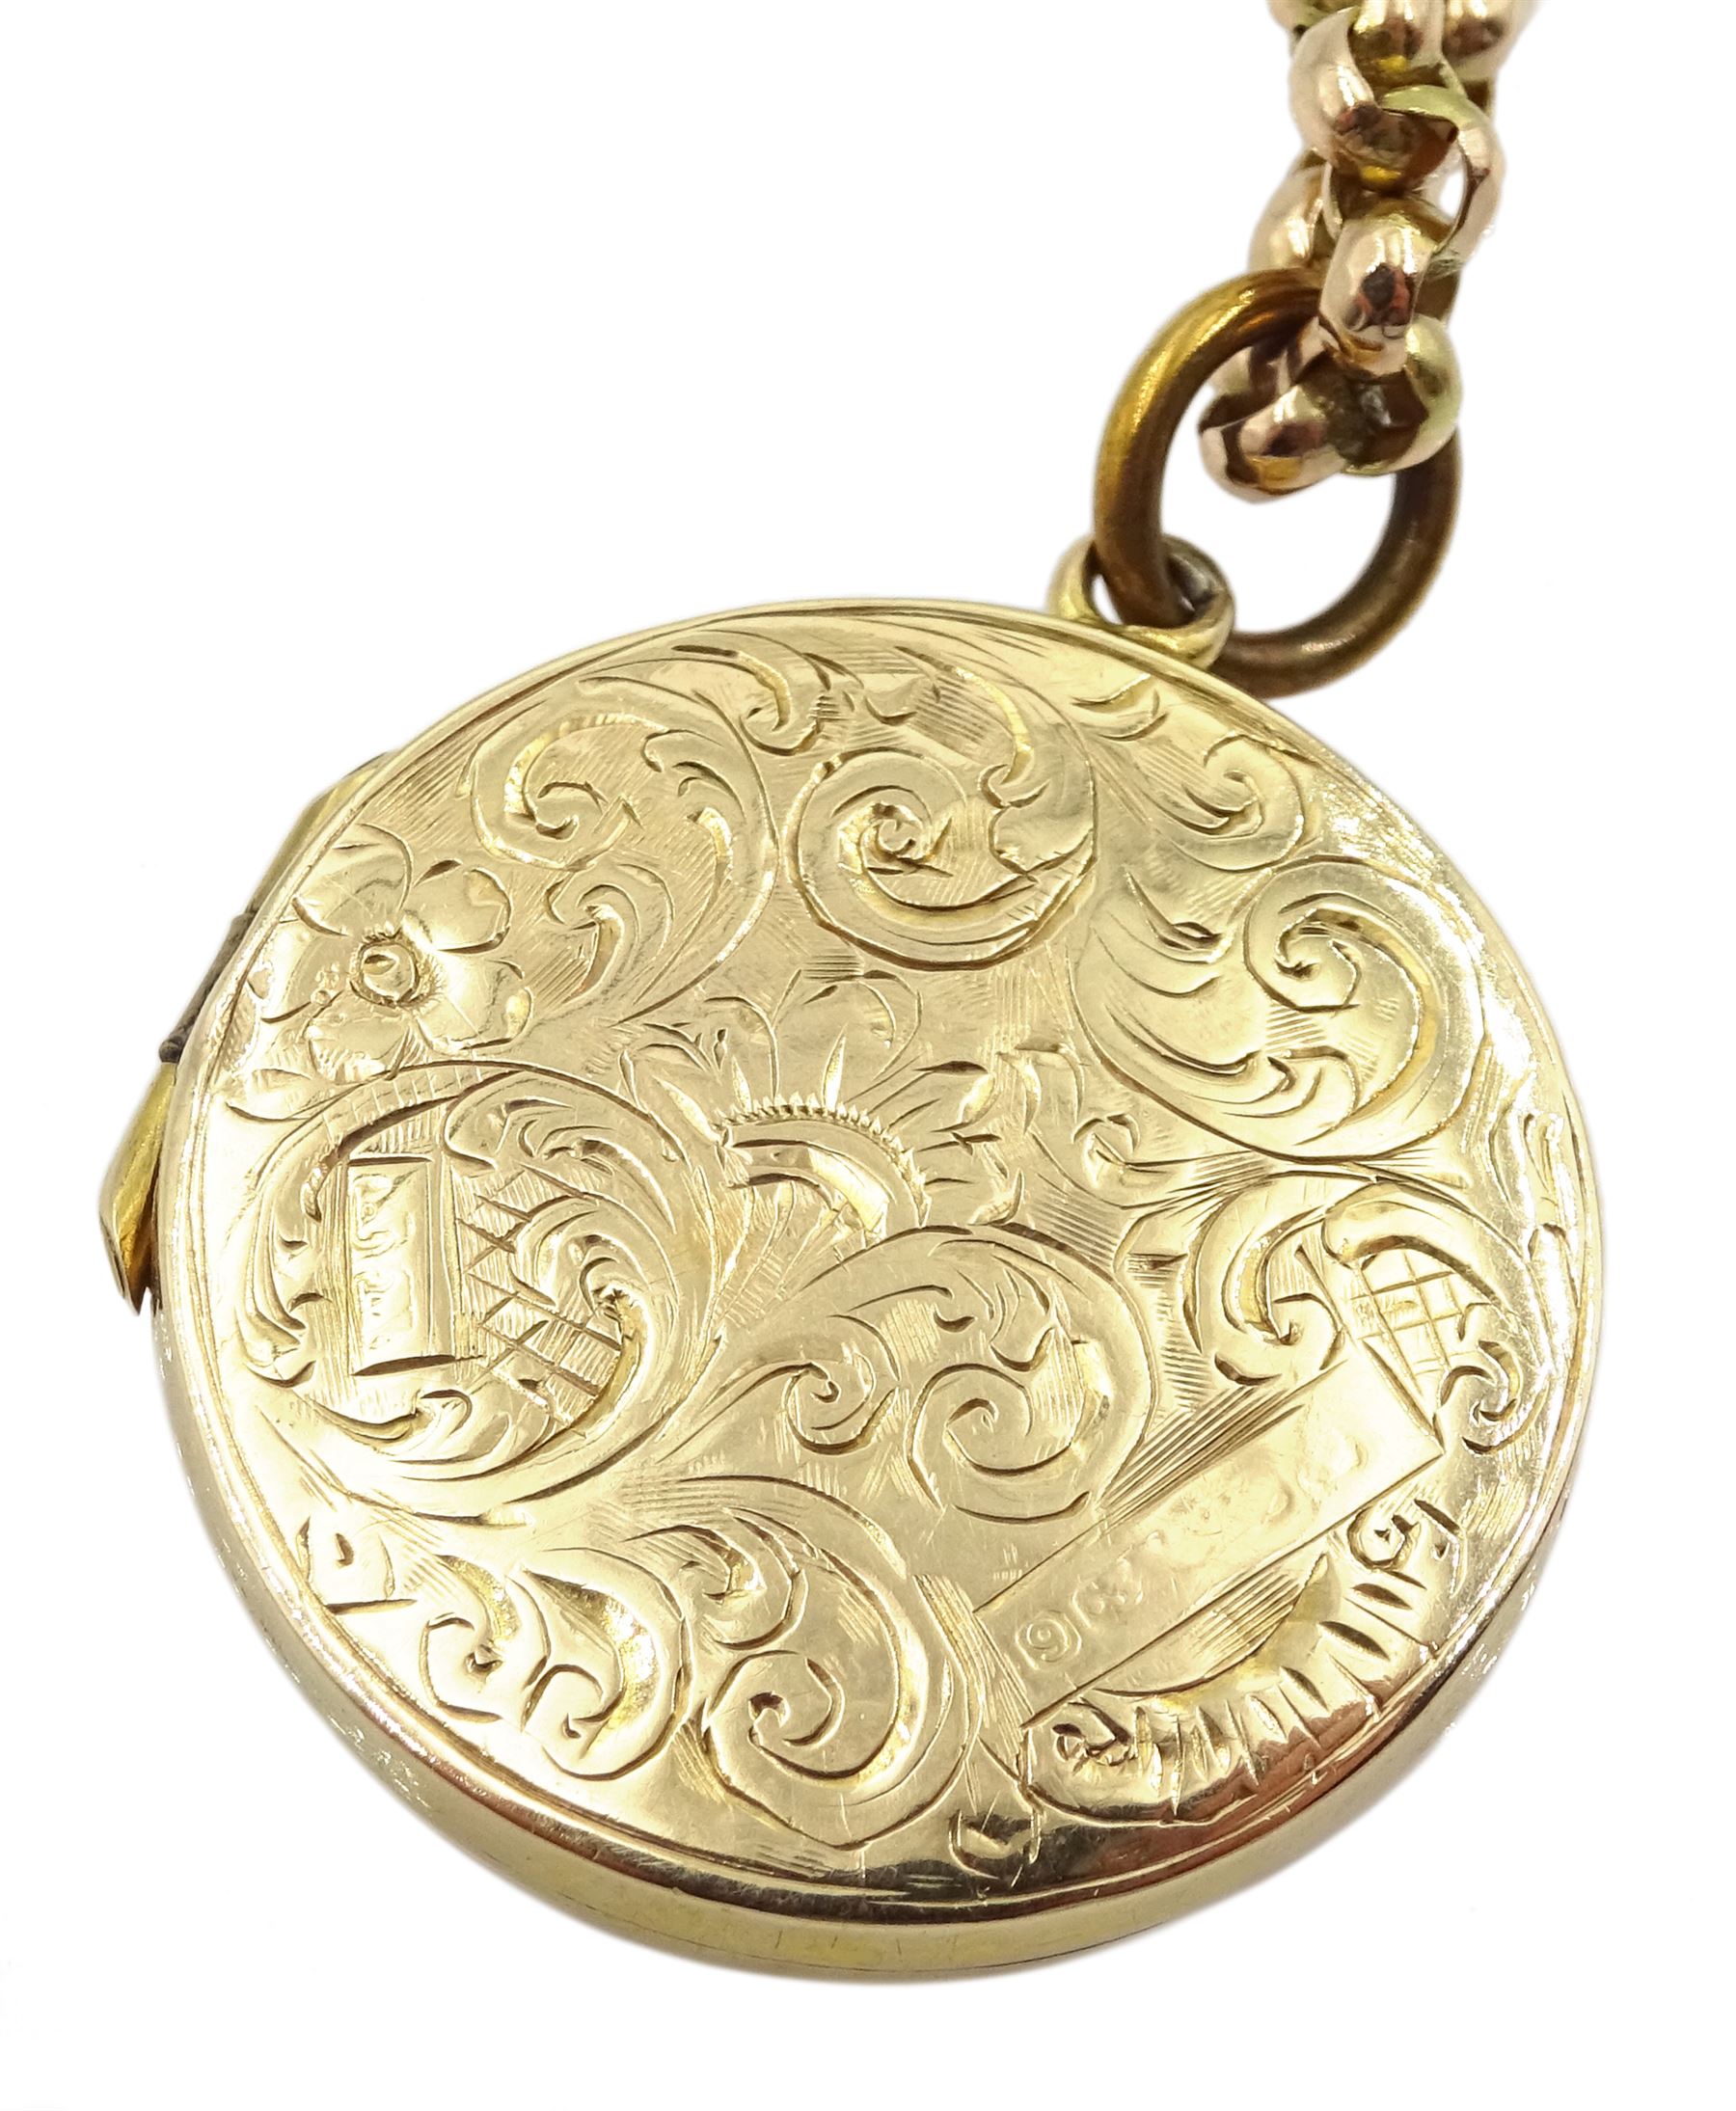 Early 20th century 9ct gold locket pendant with engraved decoration by Henry Matthews - Image 3 of 3